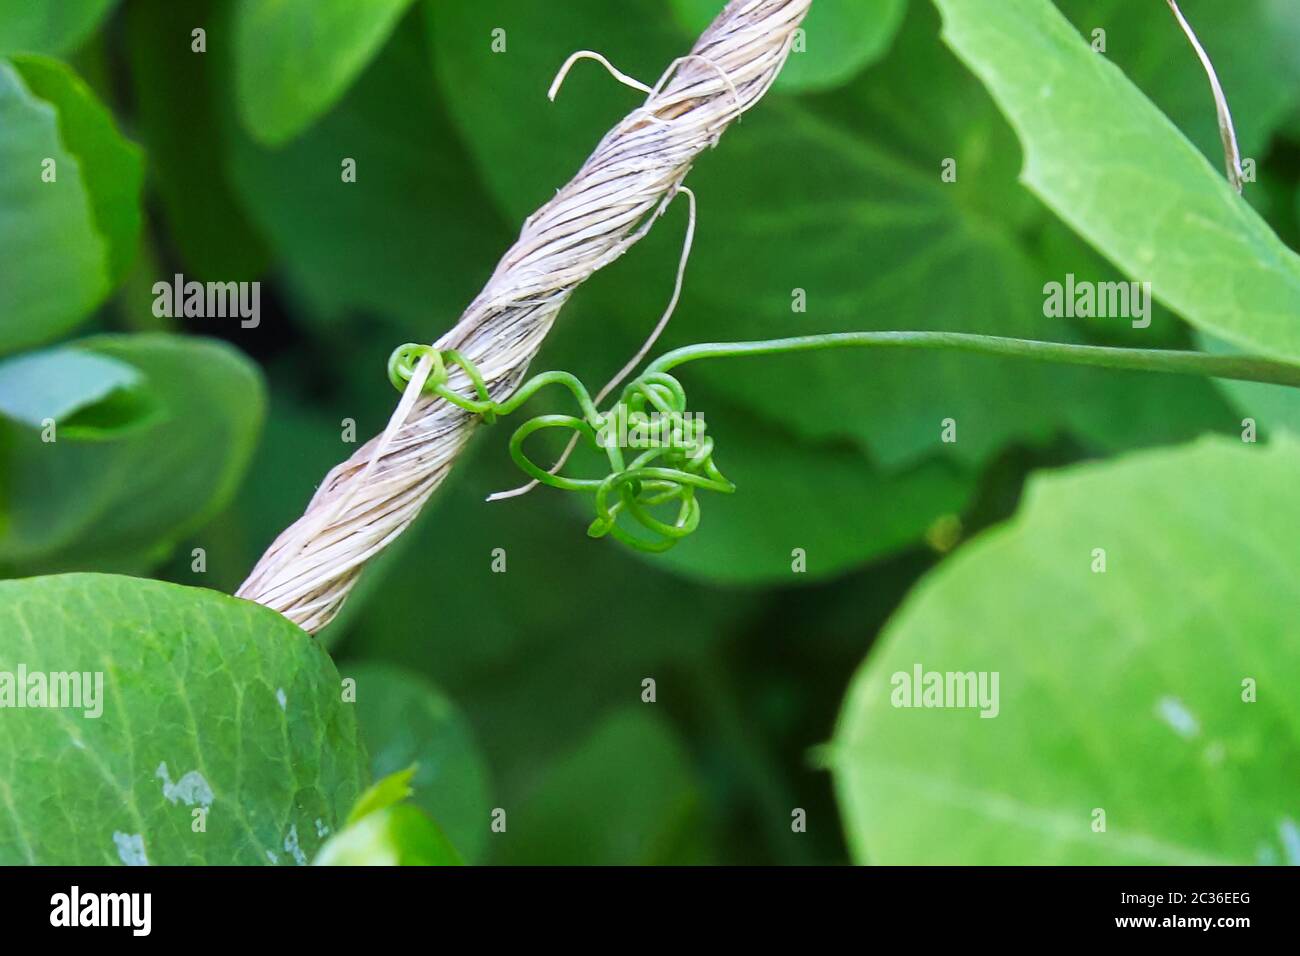 A pea vine curling around a string. Stock Photo